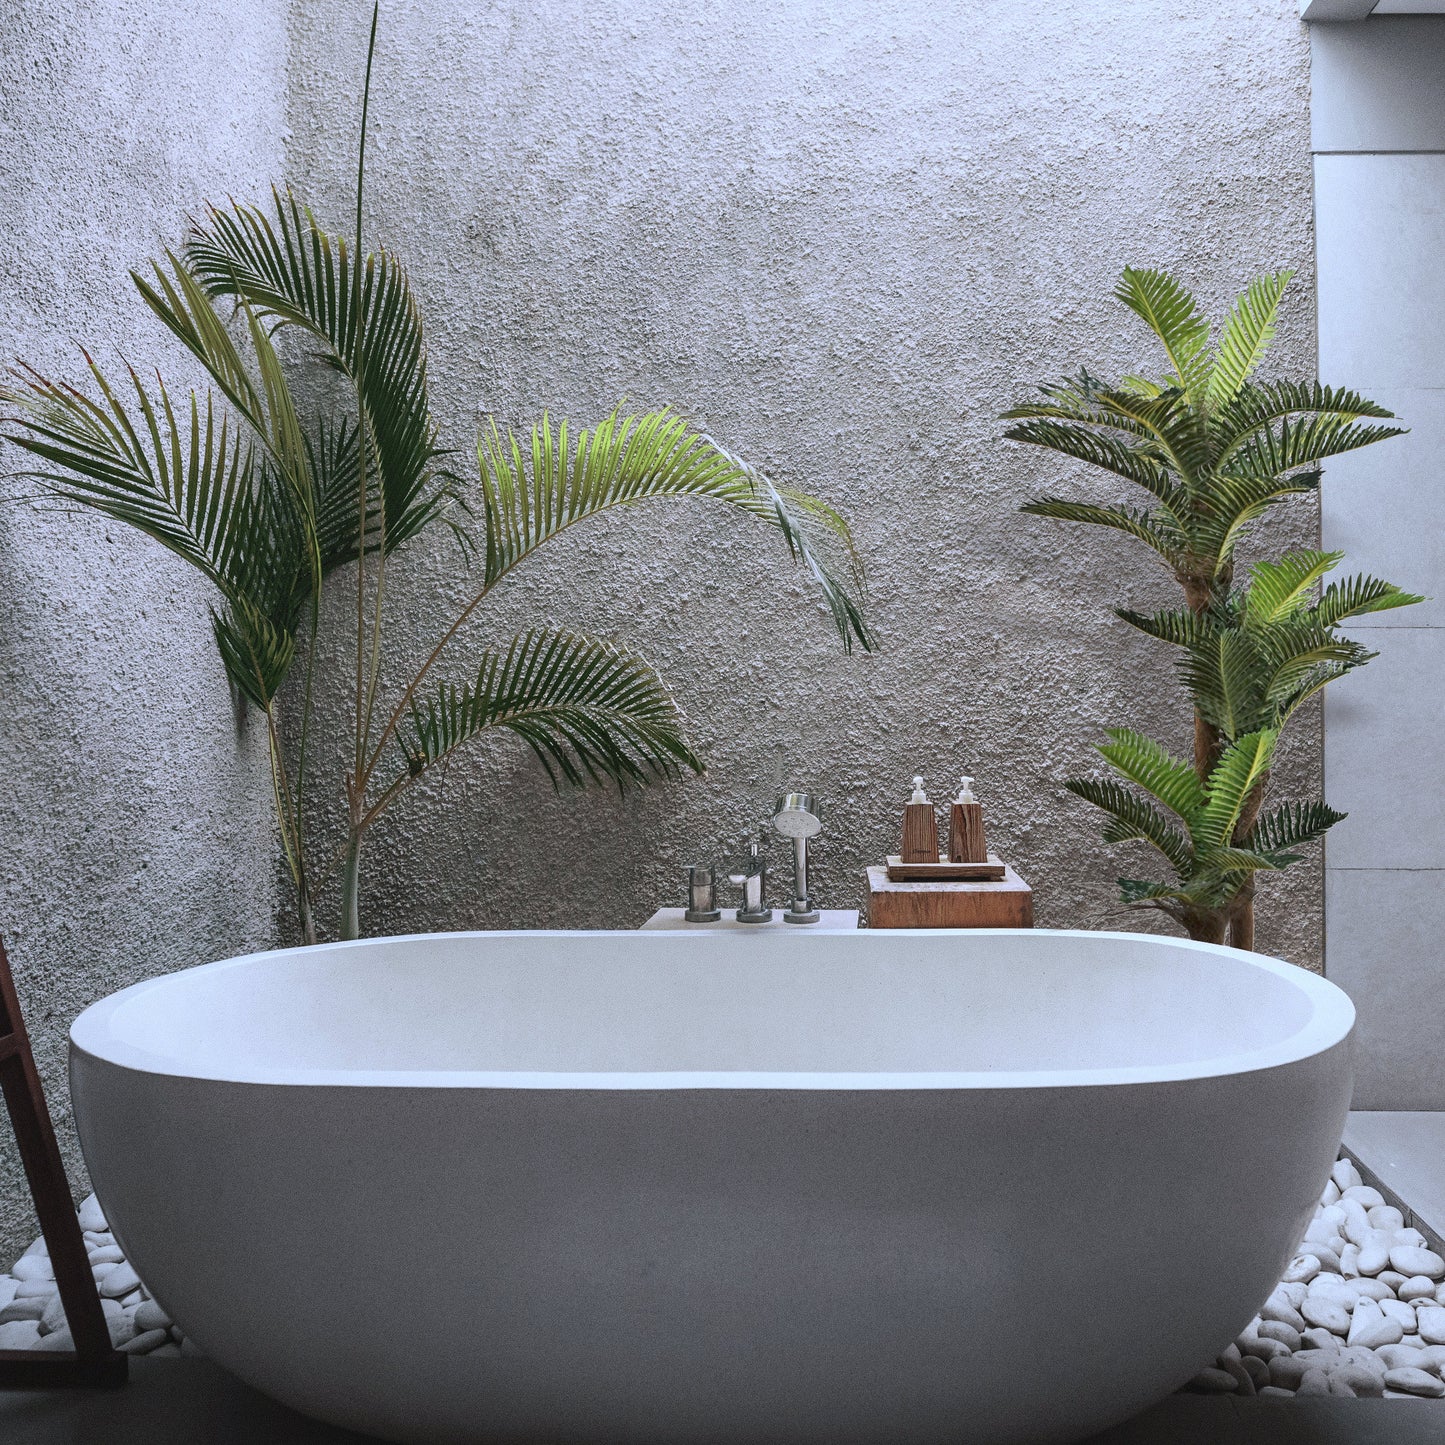 Large Artificial Tropical Palm Tree in Bathroom